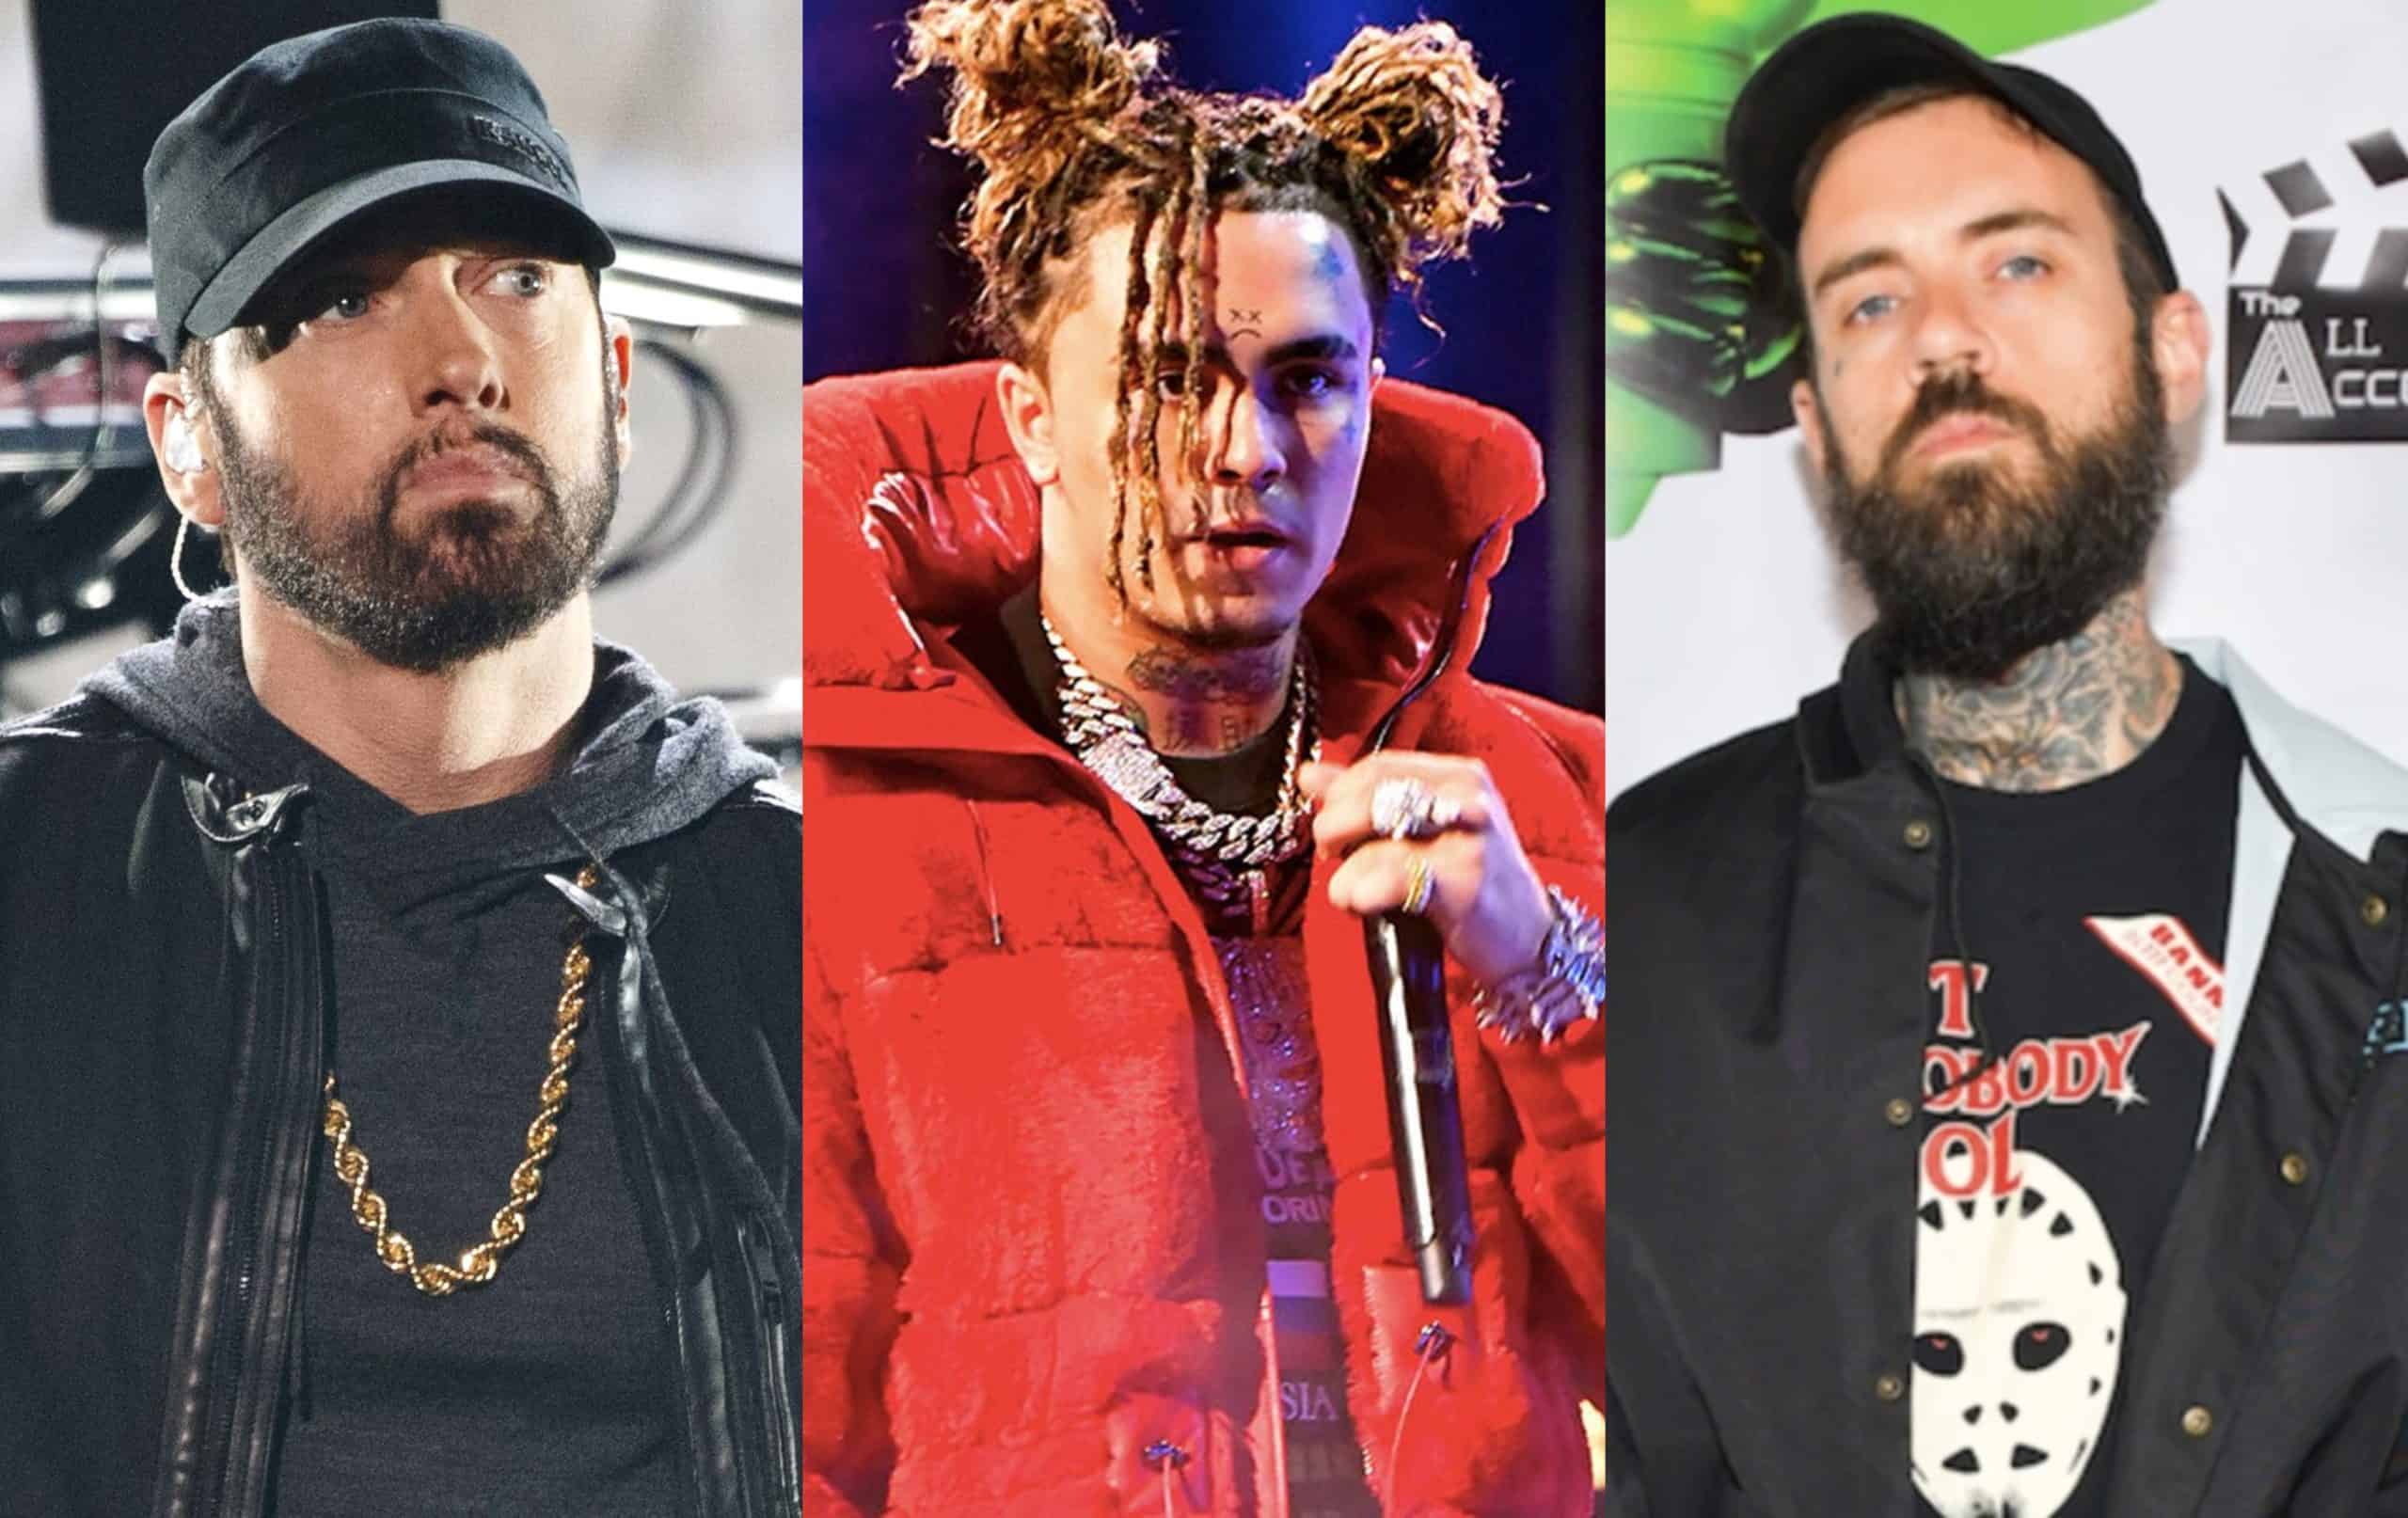 Adam22 Says Lil Pump Getting On Stage With Trump & Dissing Eminem Hurt His Career